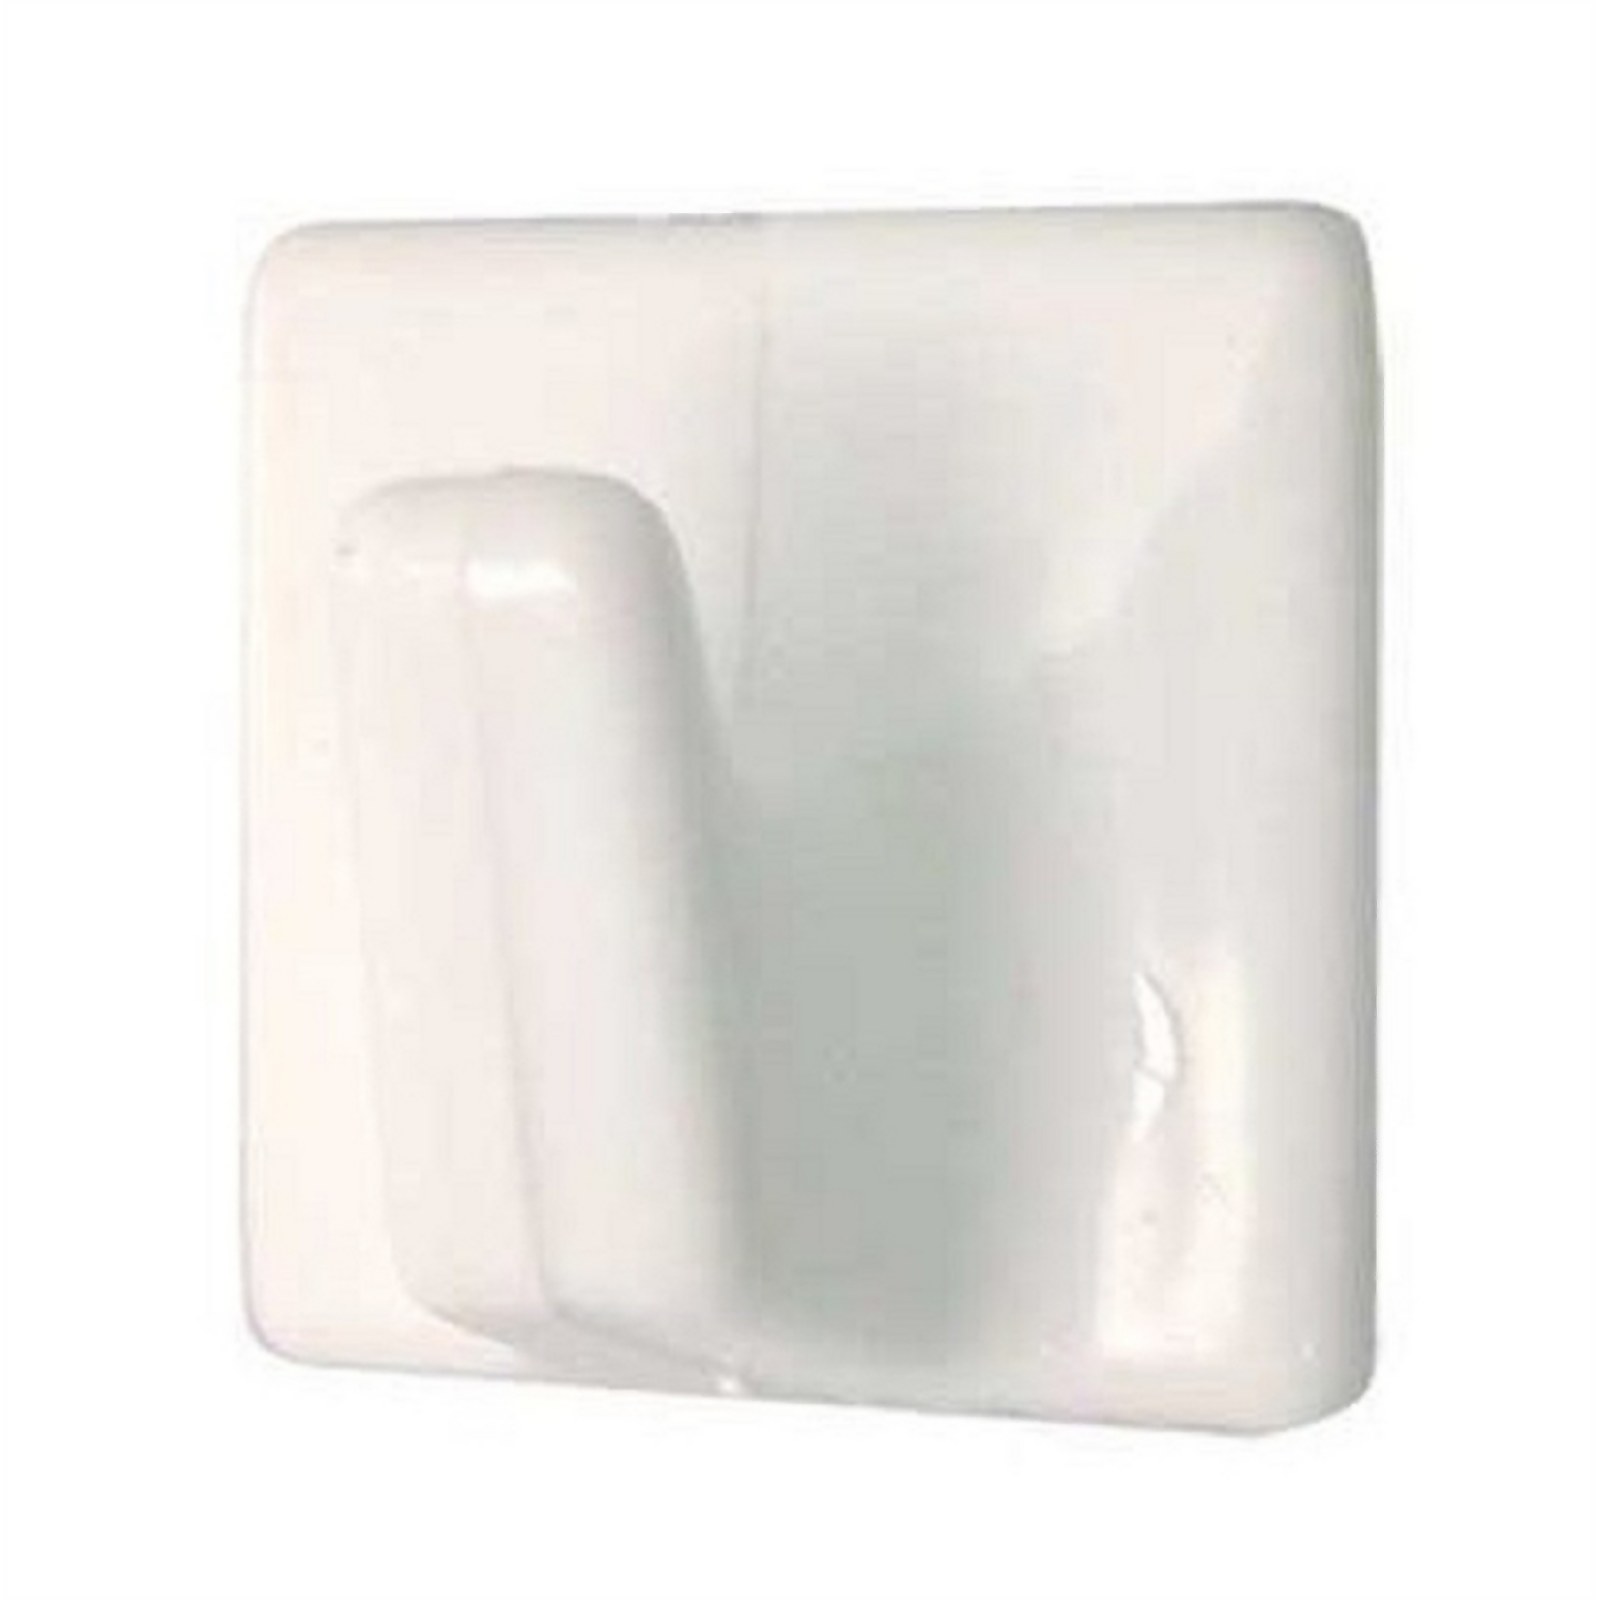 Photo of Small Square Self-adhesive Hook - White - 4 Pack